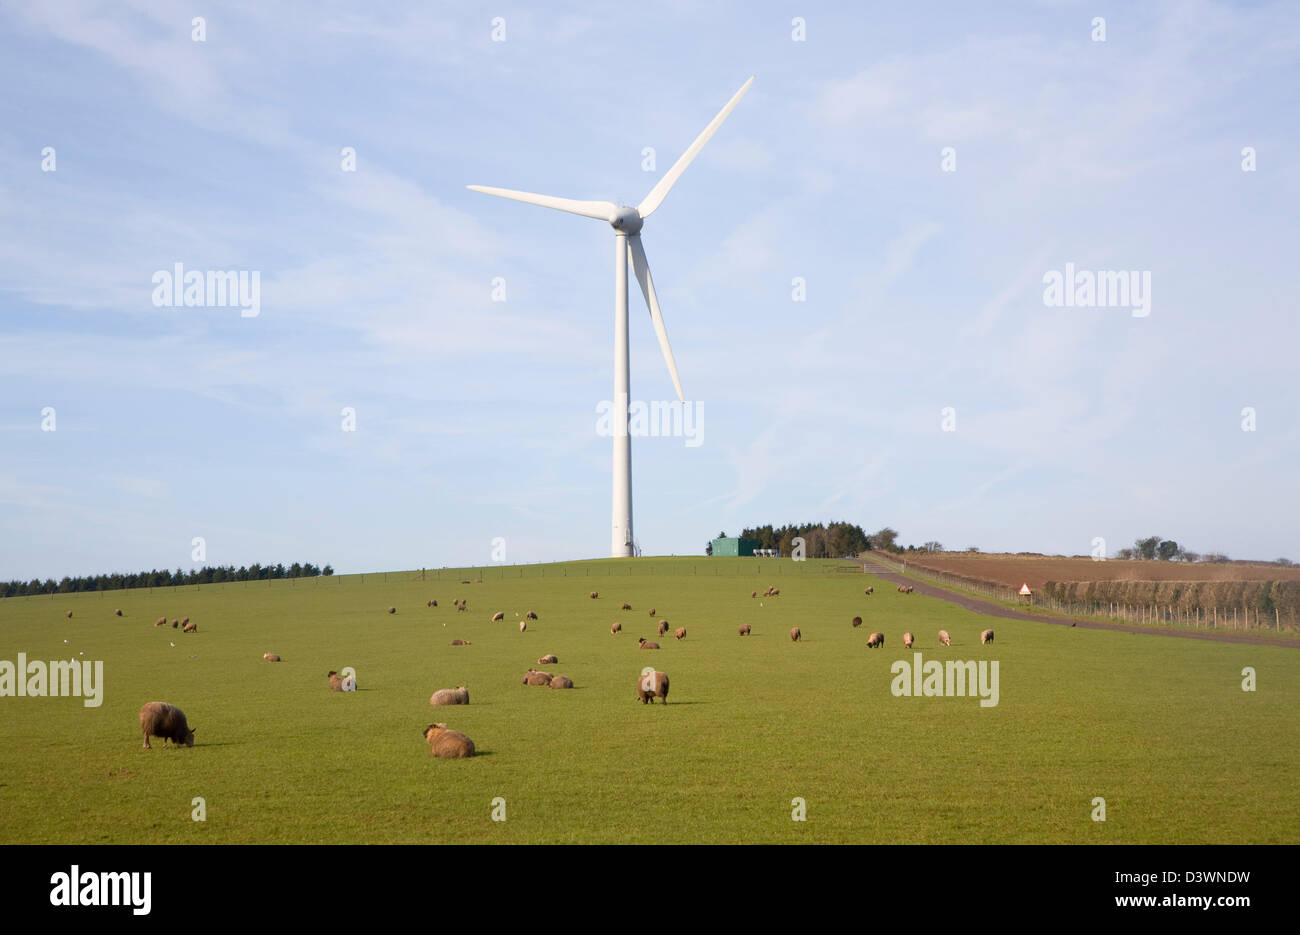 Large single wind turbine owned by Ecotricity at Shooter's Bottom, Chewton Mendip, Somerset, England Stock Photo